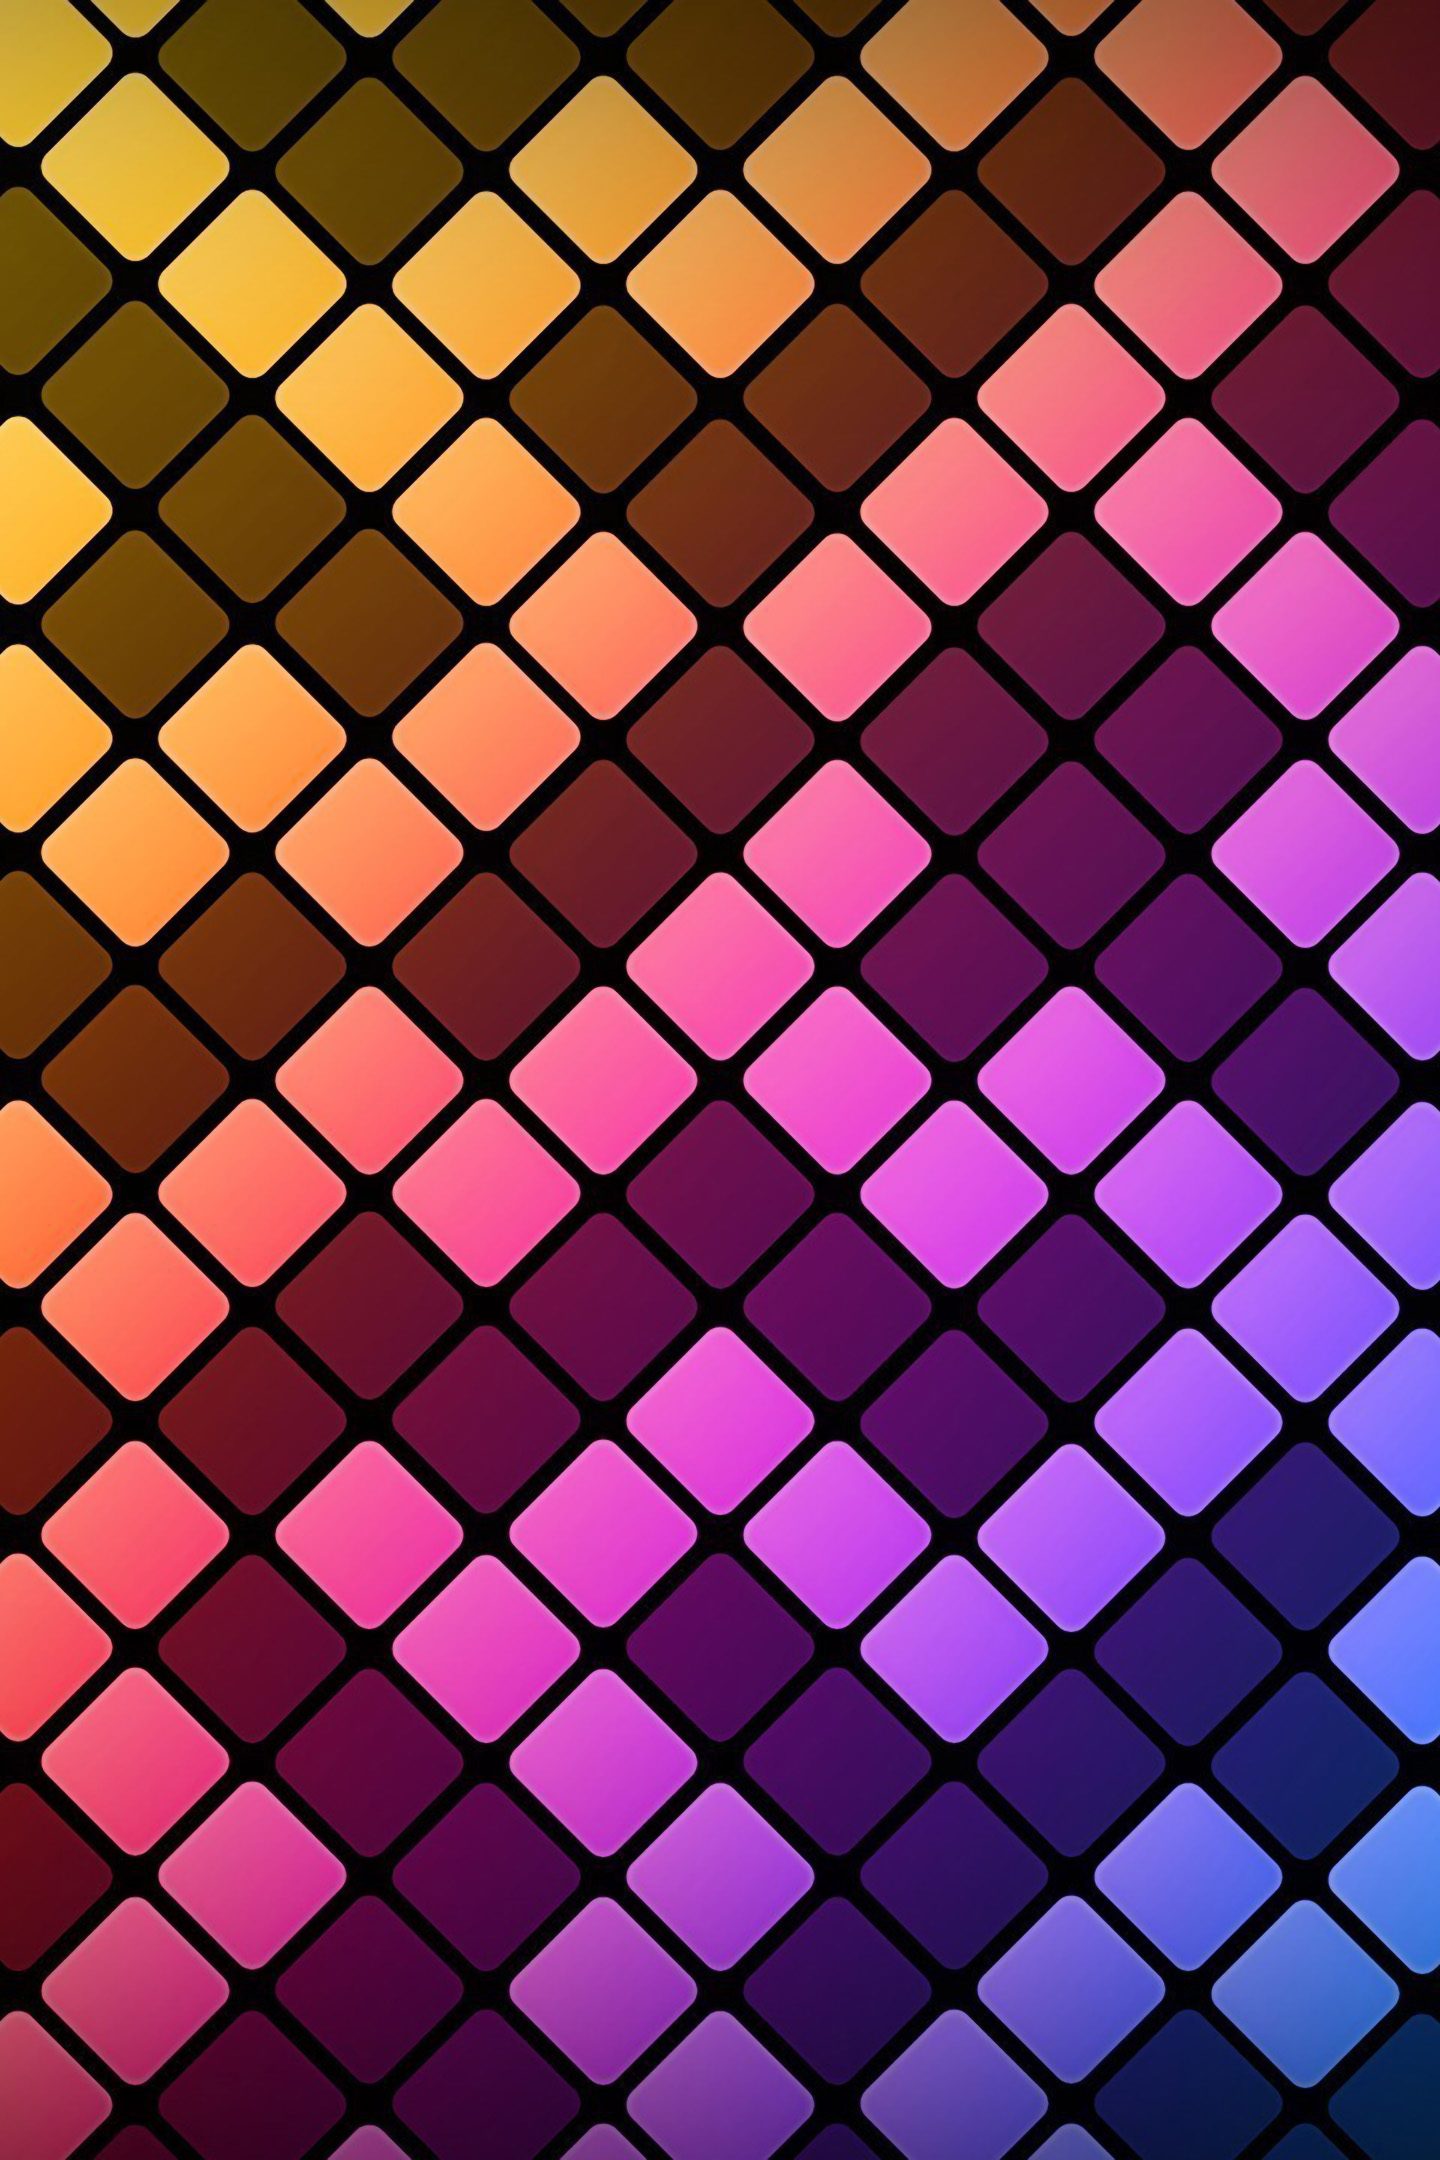 Textures In Square Patterns - HD Wallpaper 